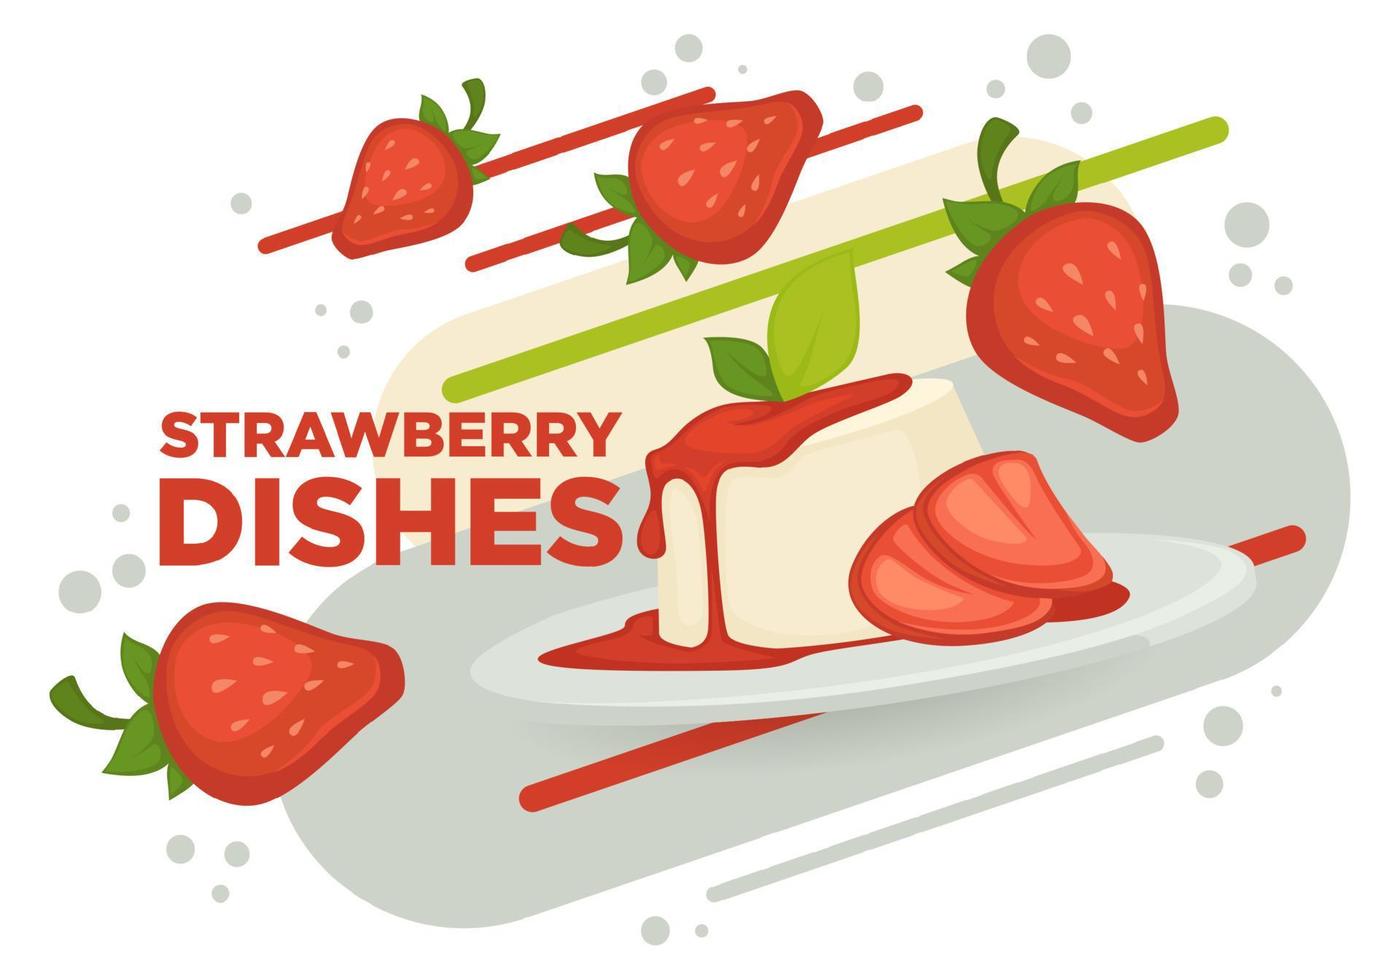 Strawberry dishes dessert with fresh berries jam vector